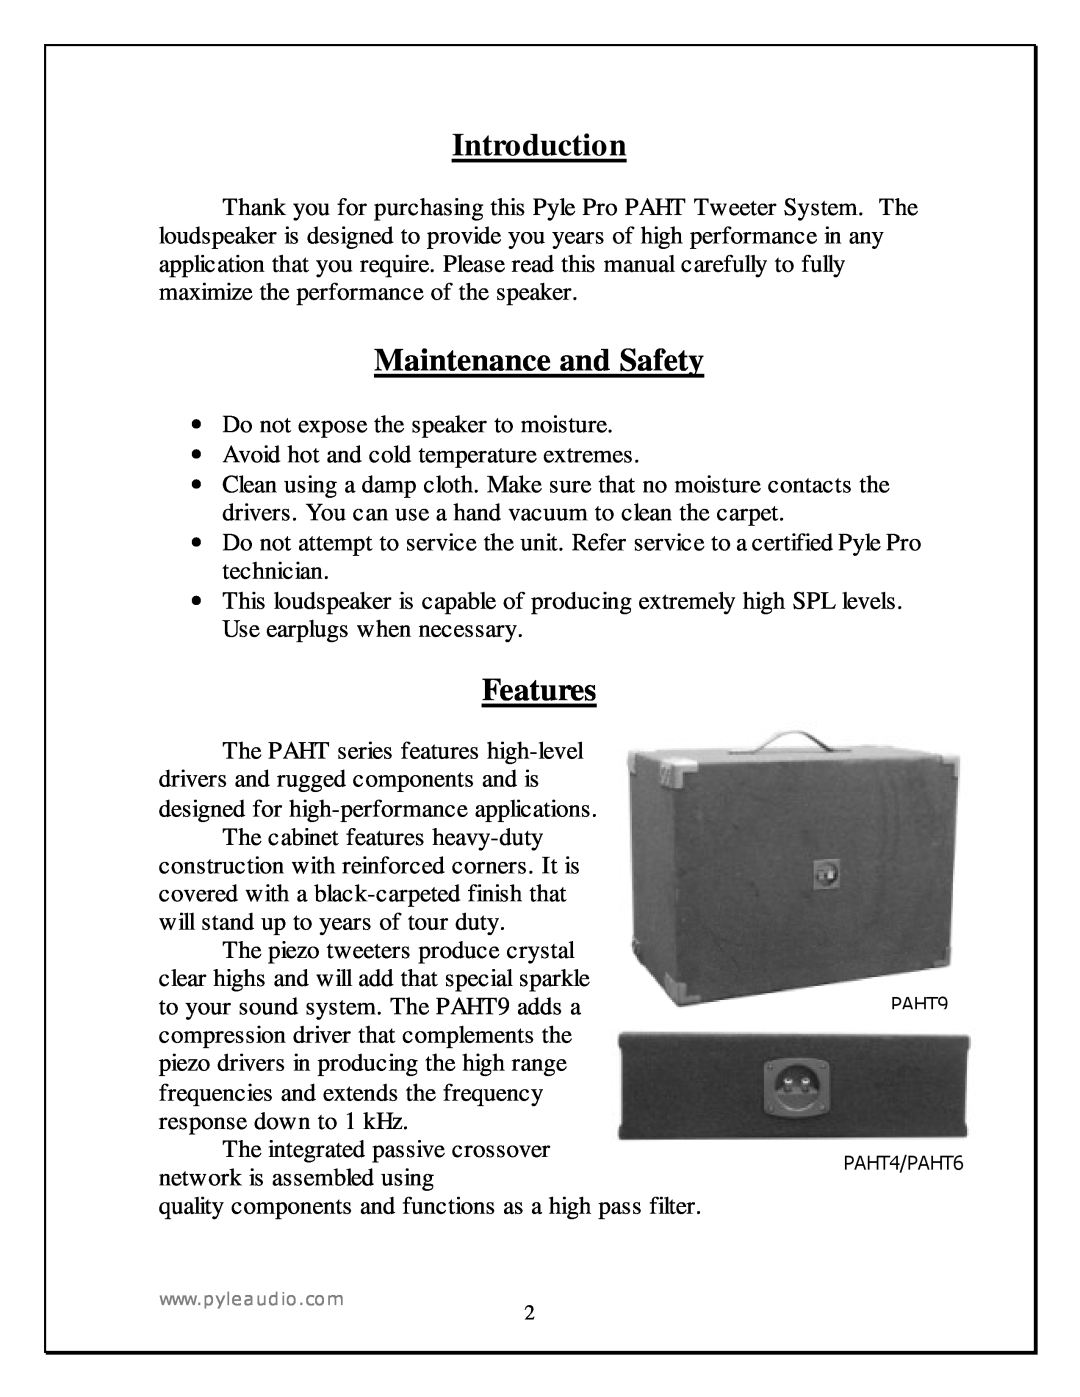 PYLE Audio PAHT4 manual Introduction, Maintenance and Safety, Features 